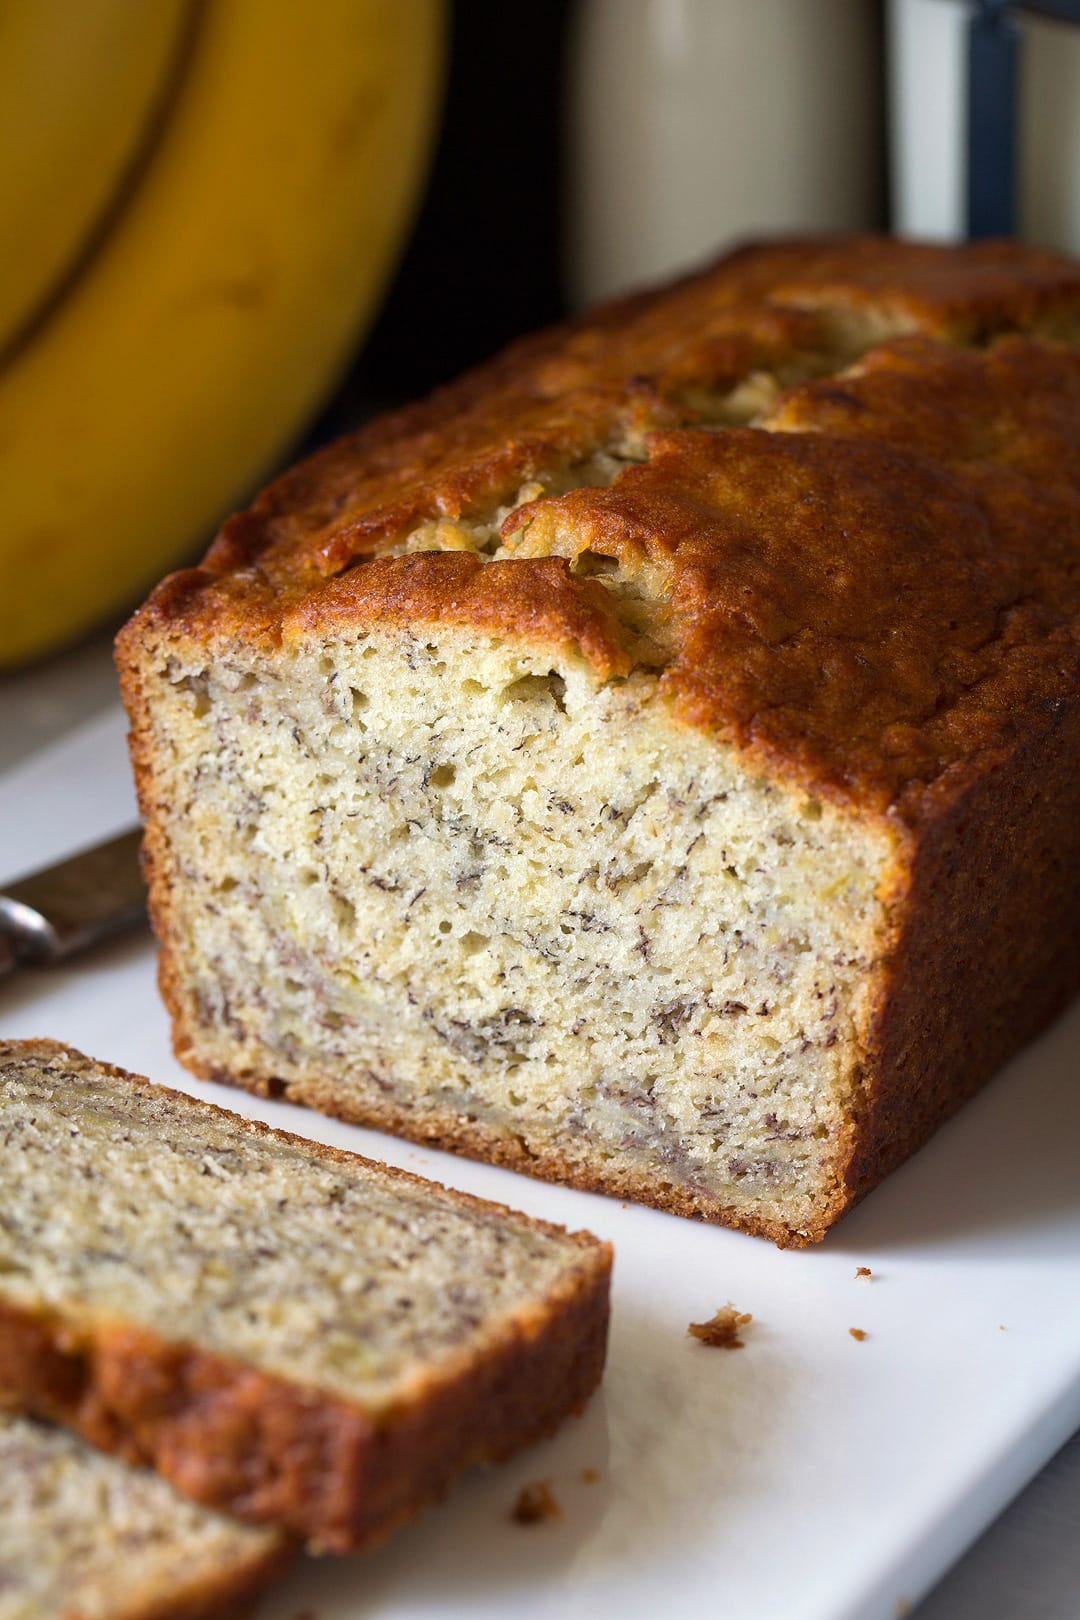 Banana Bread Recipe with Video! - Cooking Classy